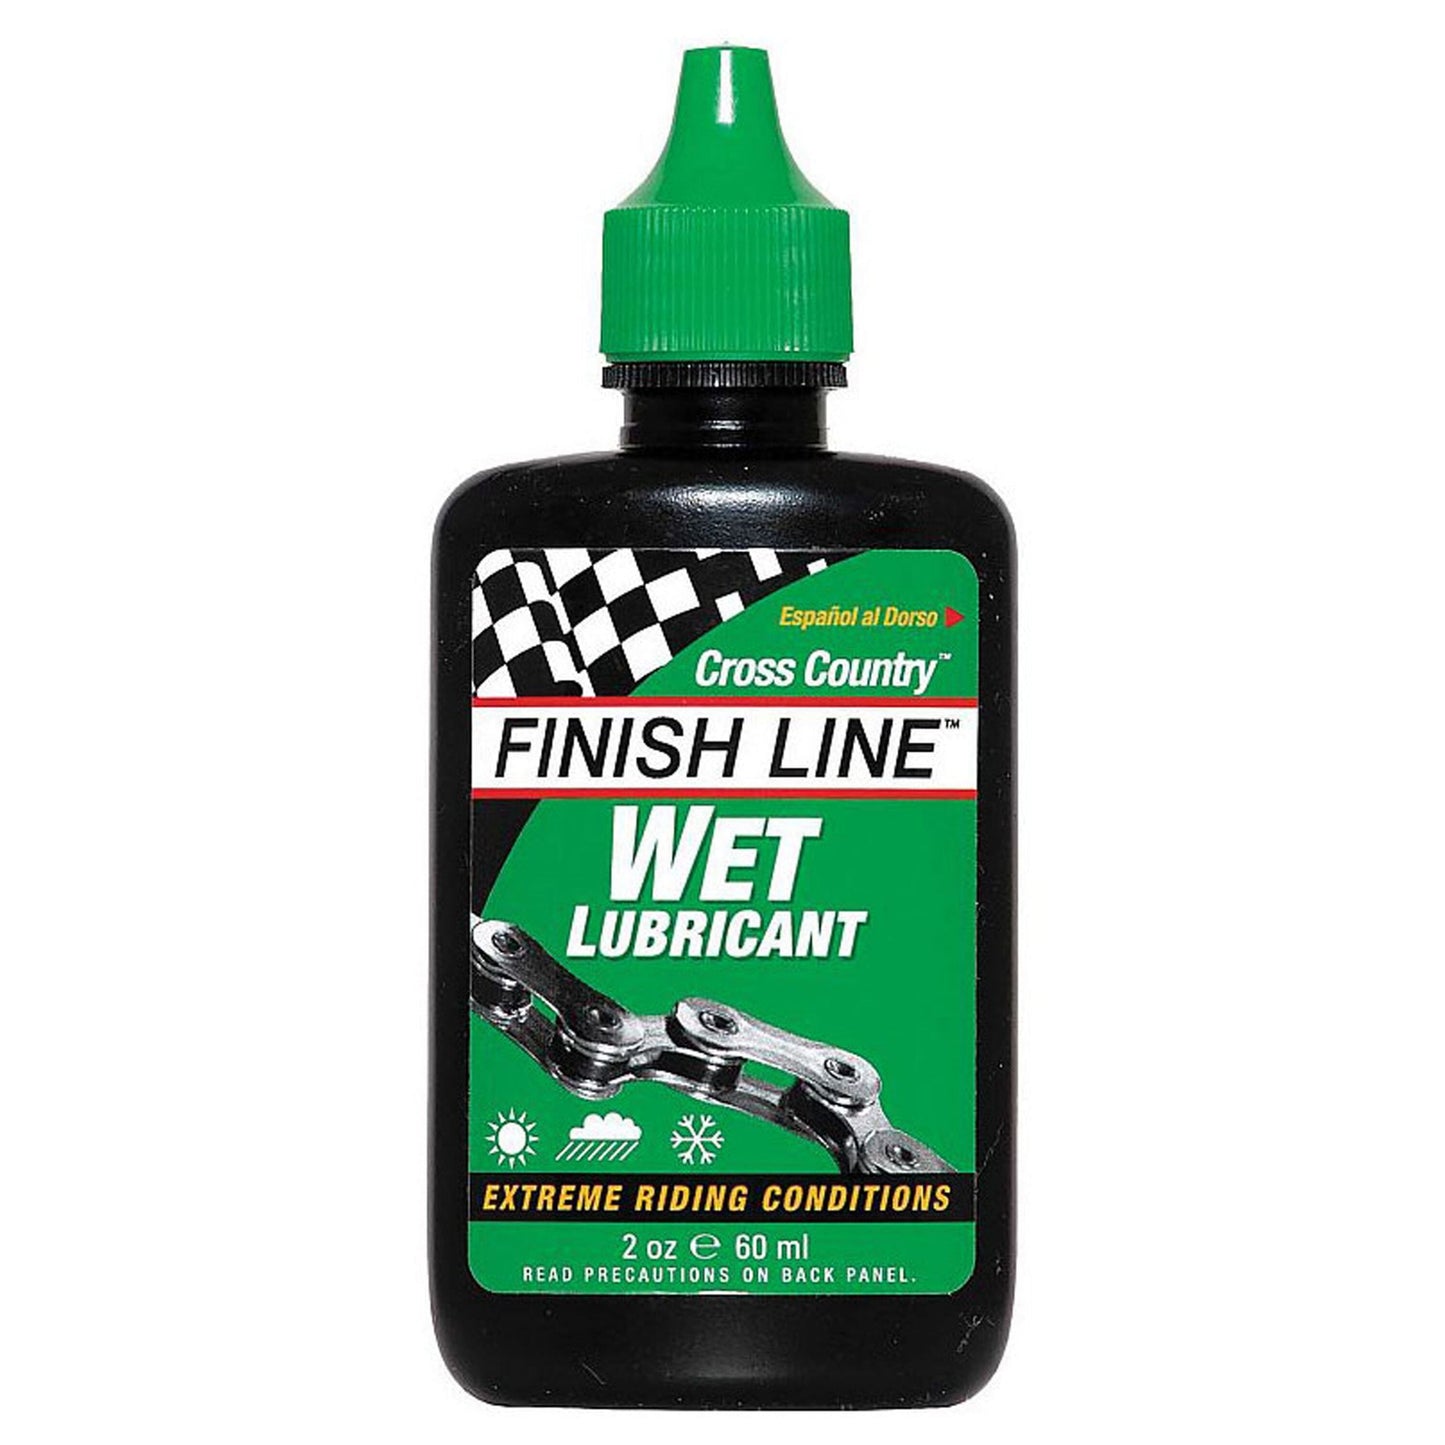 Cross Country Drop Finish Line Wet Lubricant 60ml